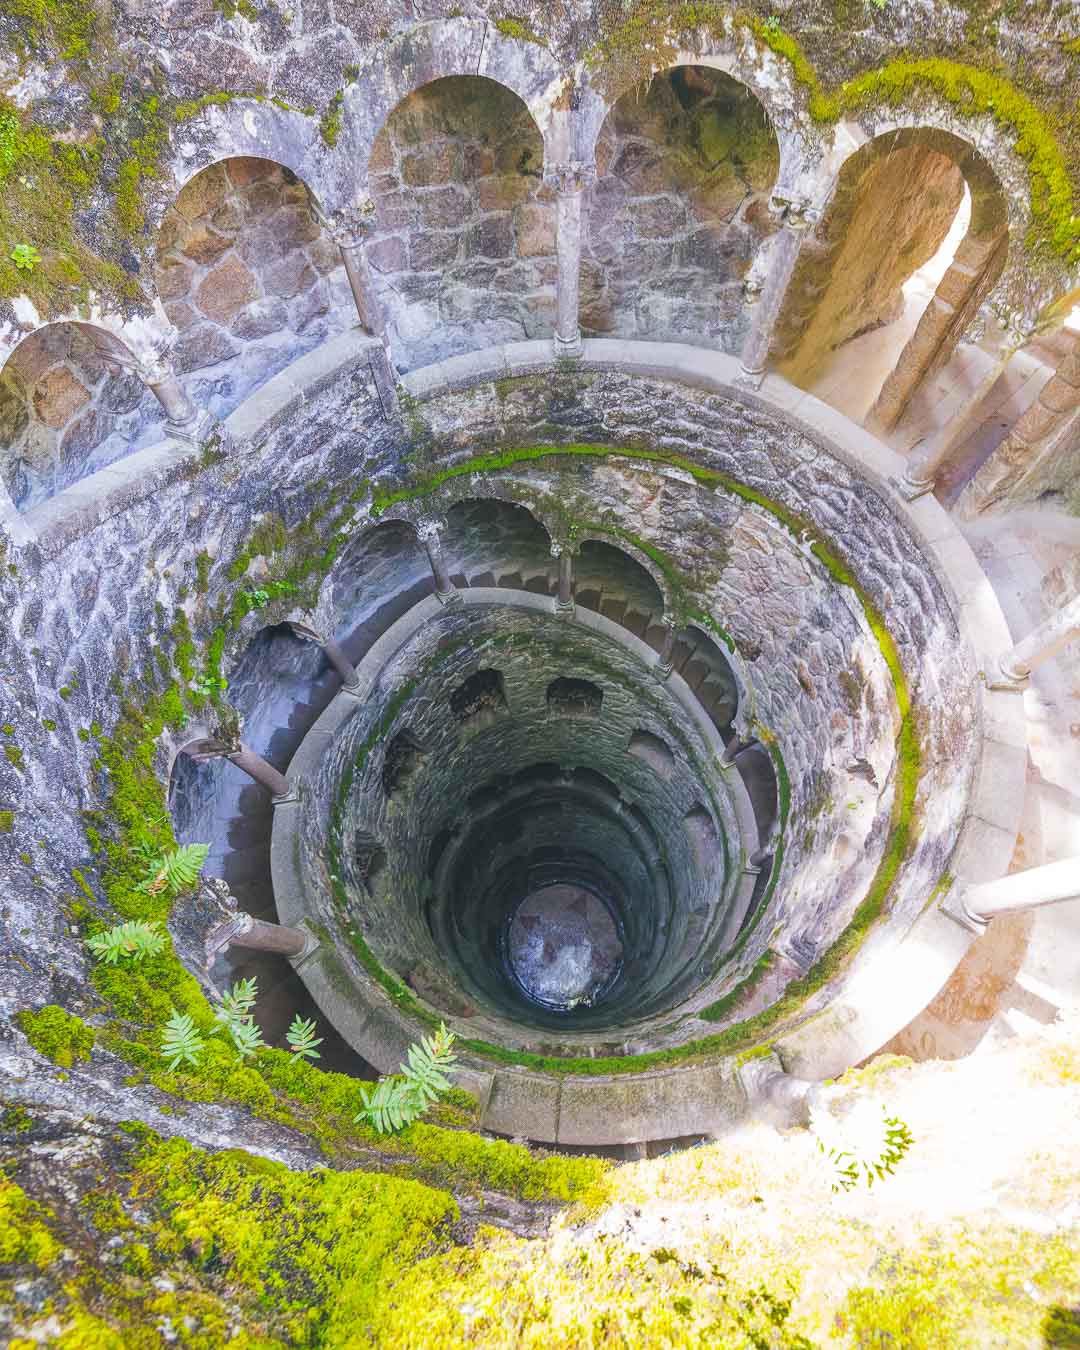 quinta da regaleira is one of the famous buildings in portugal